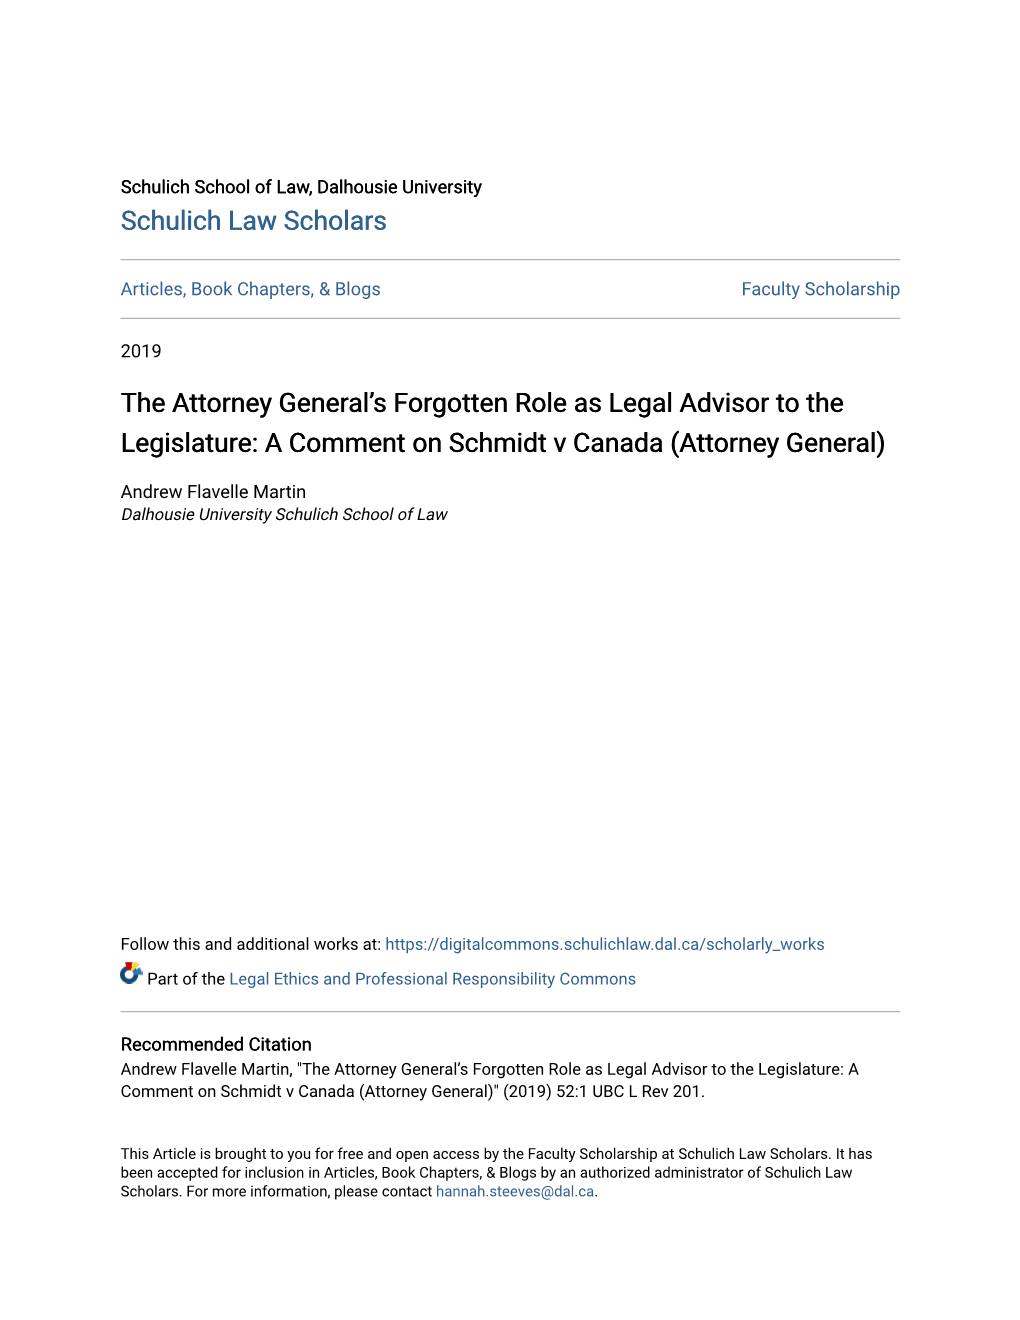 Attorney General’S Forgotten Role As Legal Advisor to the Legislature: a Comment on Schmidt V Canada (Attorney General)